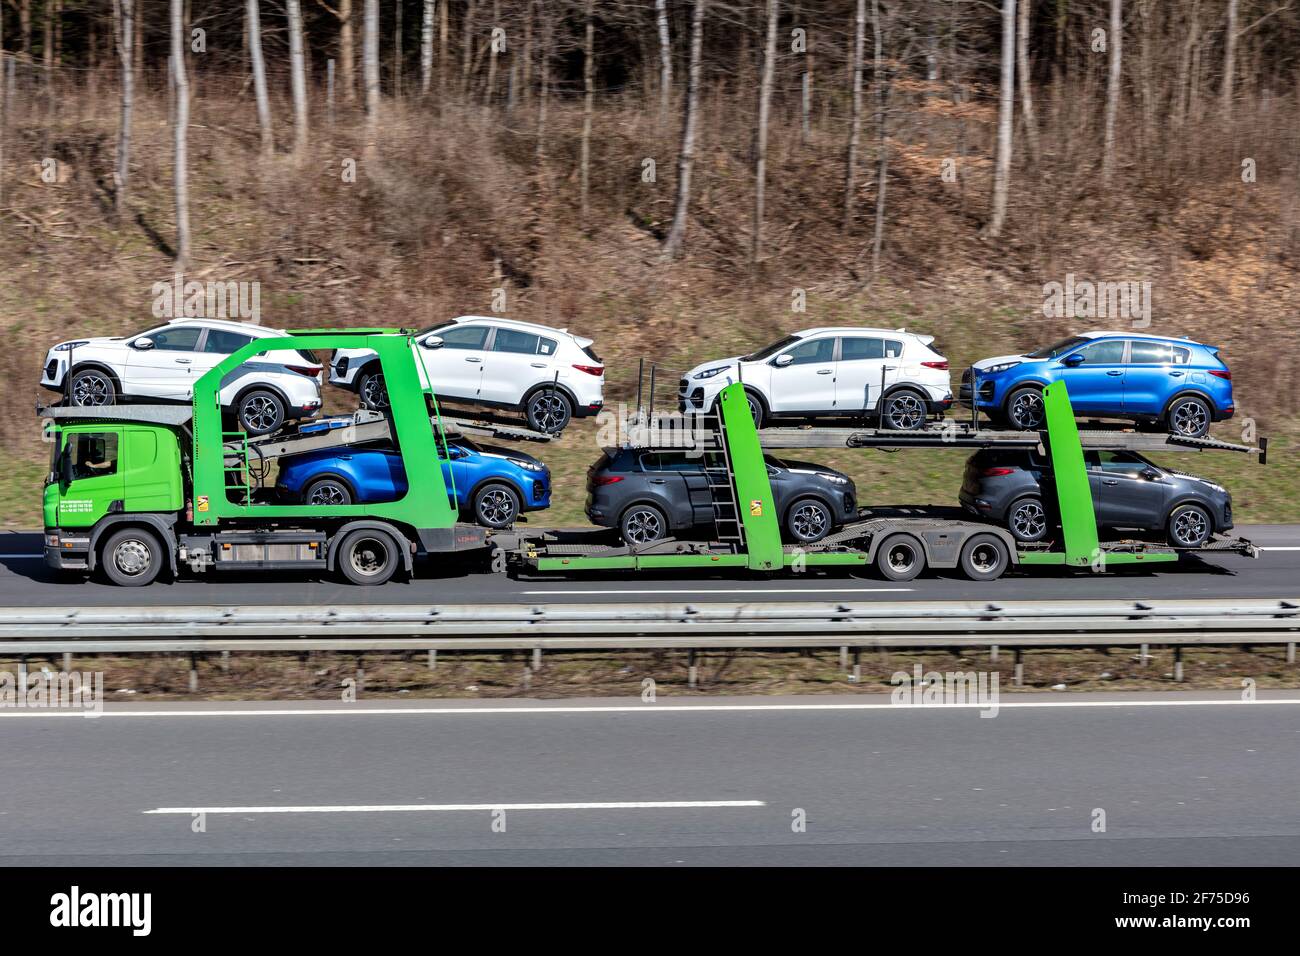 Adampol Scania car-carrying truck loaded with new Kia Sportage cars on motorway. Stock Photo